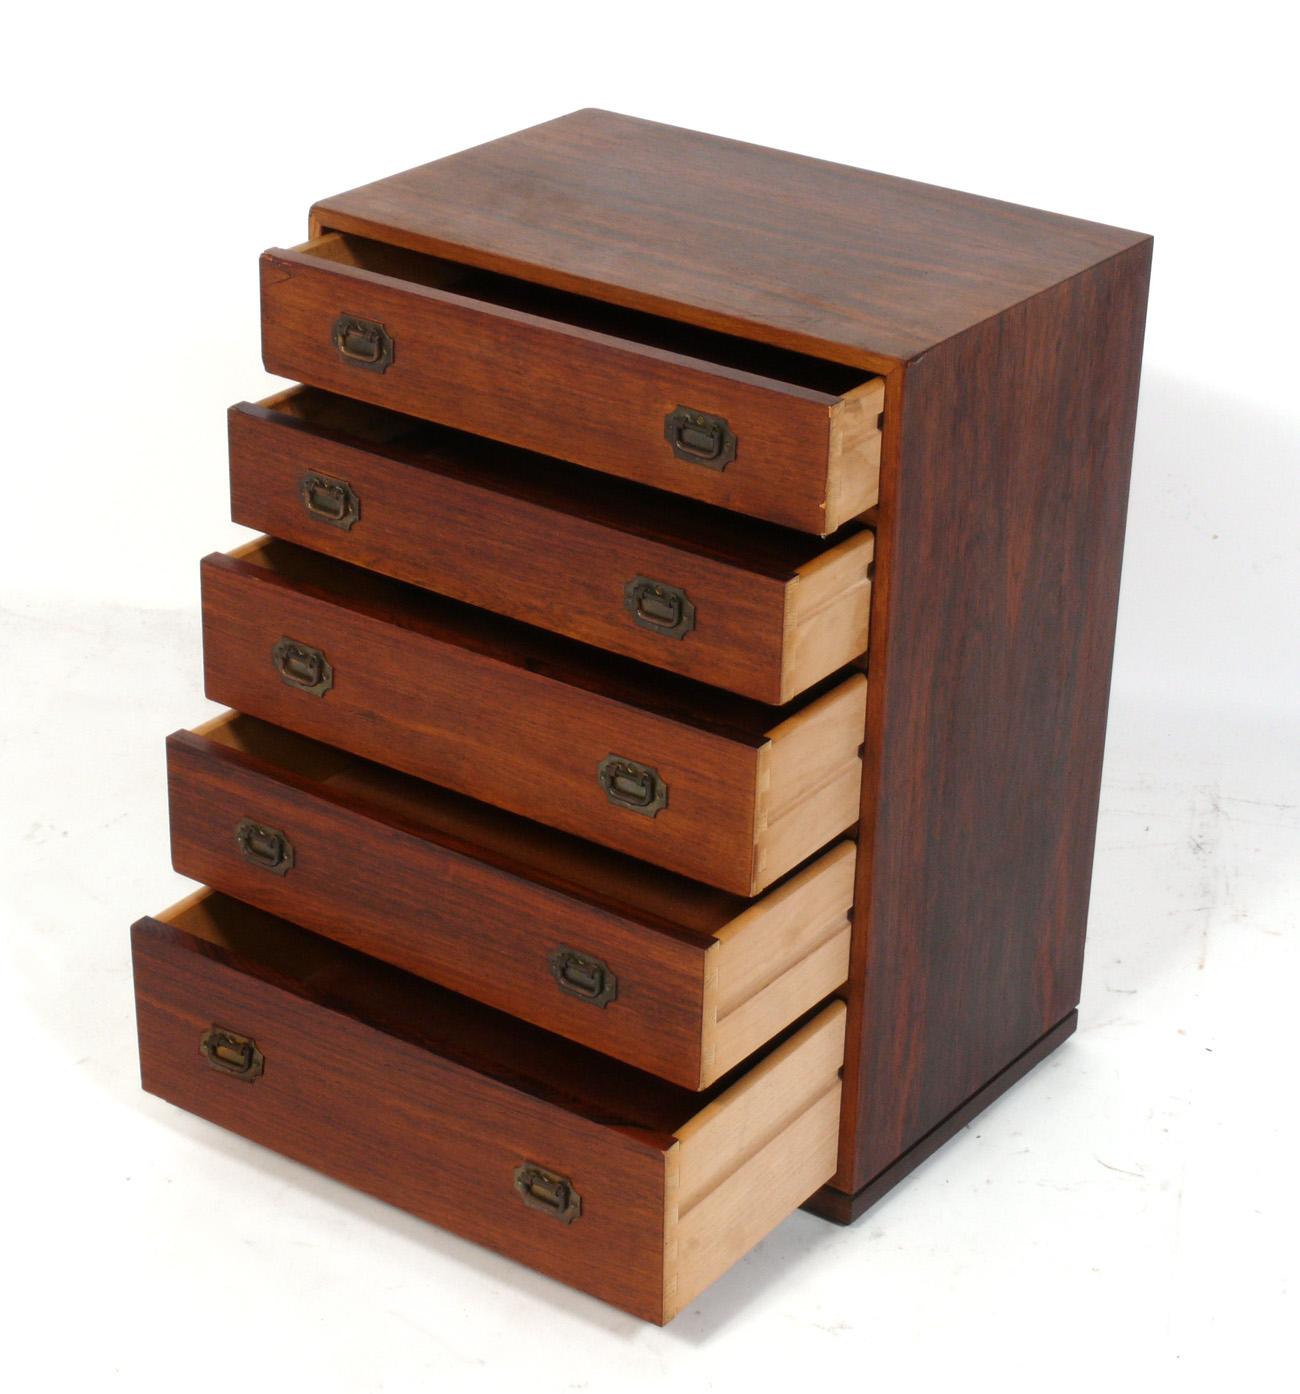 Danish Modern rosewood lingerie chest by Henning Korch for Silkeborg Møbelfabrik, Denmark, circa 1960s. This piece is a diminutive size and can be used as a side or end table, night stand, or tabletop lingerie chest. It has been cleaned and Danish